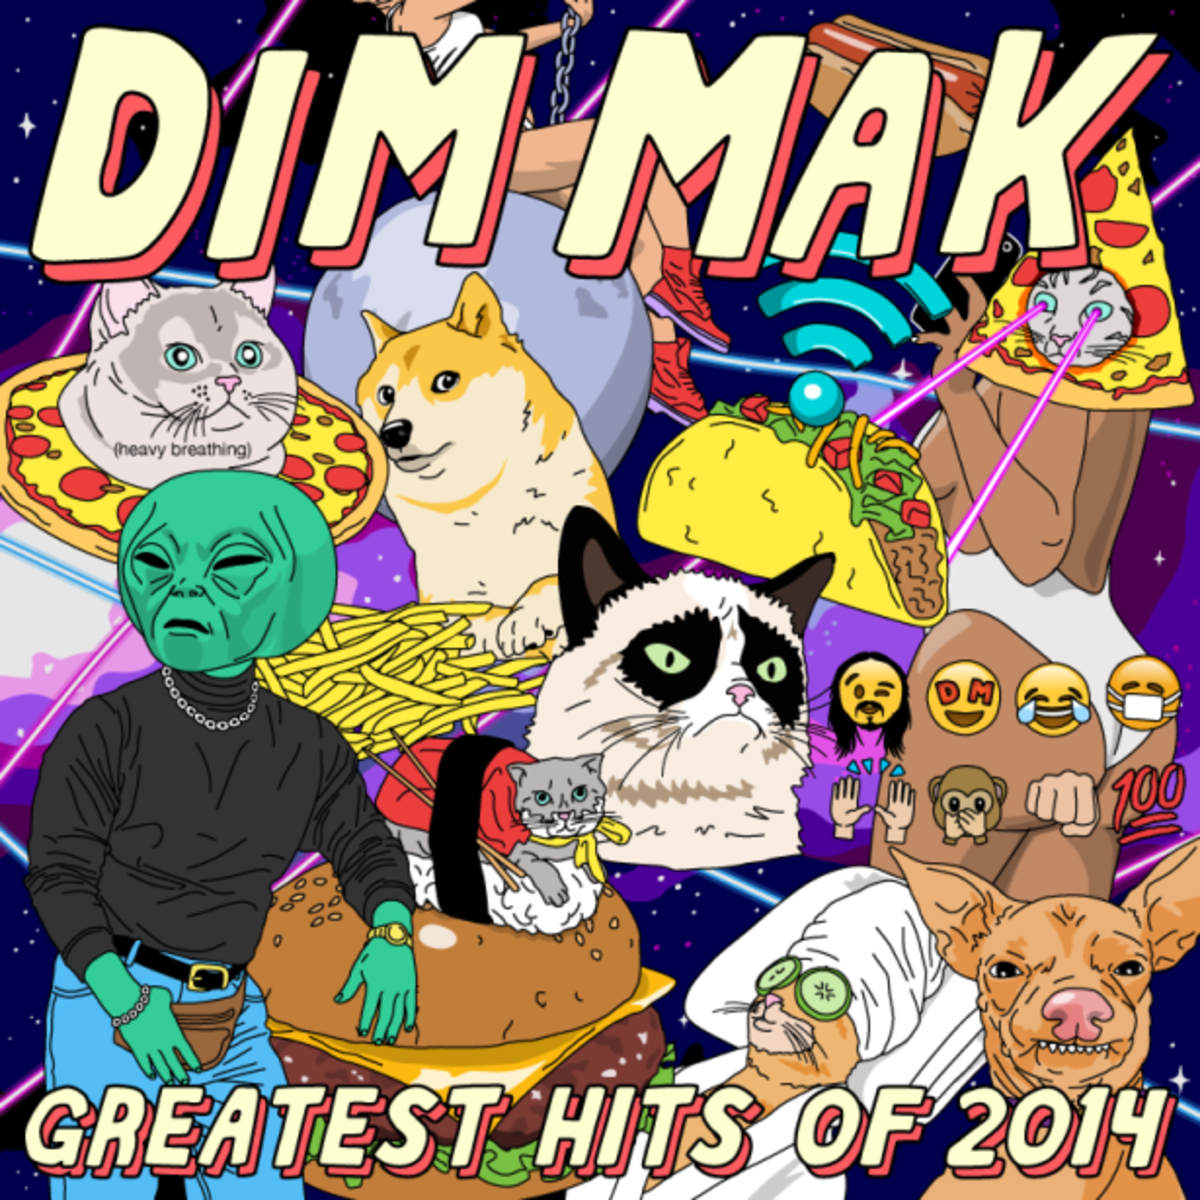 The Dim Mak 2014 Greatest Hits Is A Less Obvious Recap